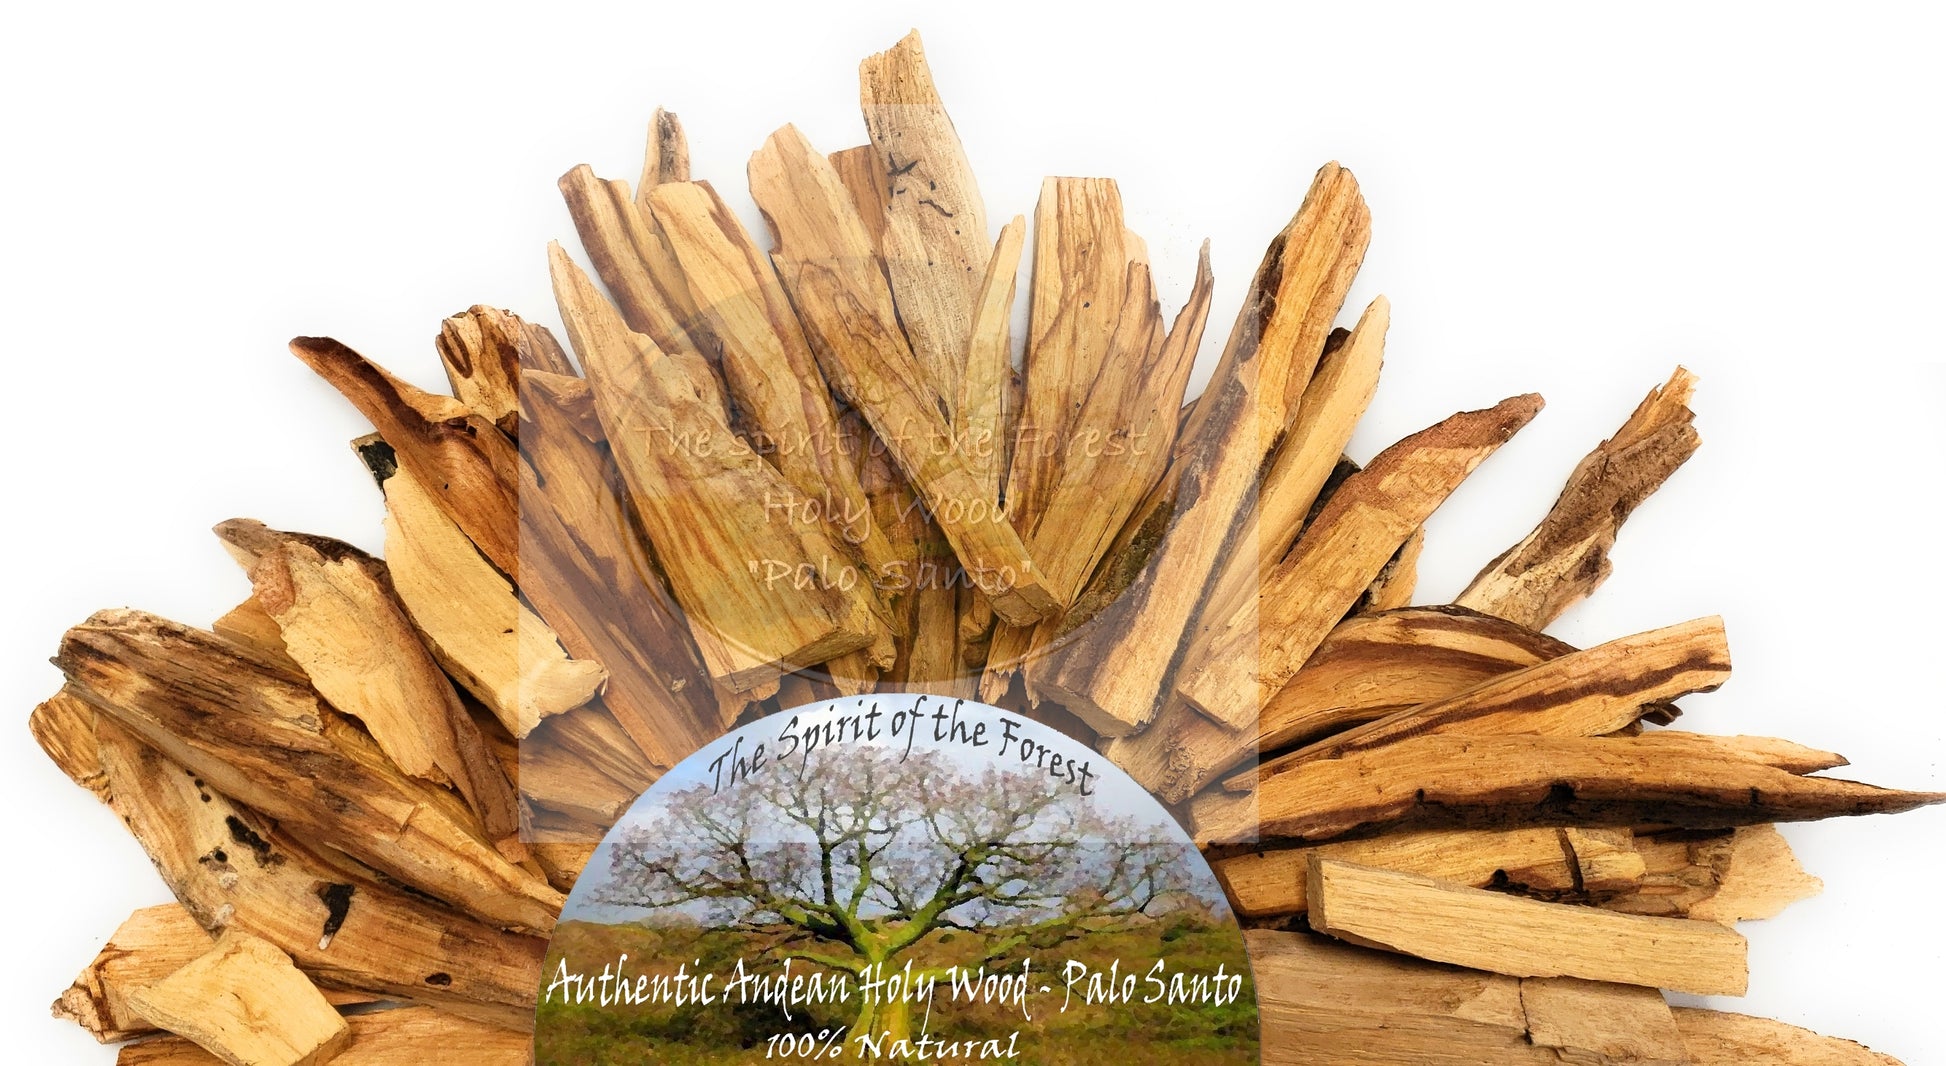 The Spirit of the Forest Authentic  mystical Palo Santo   Holy Wood 100% Natural - UproMax